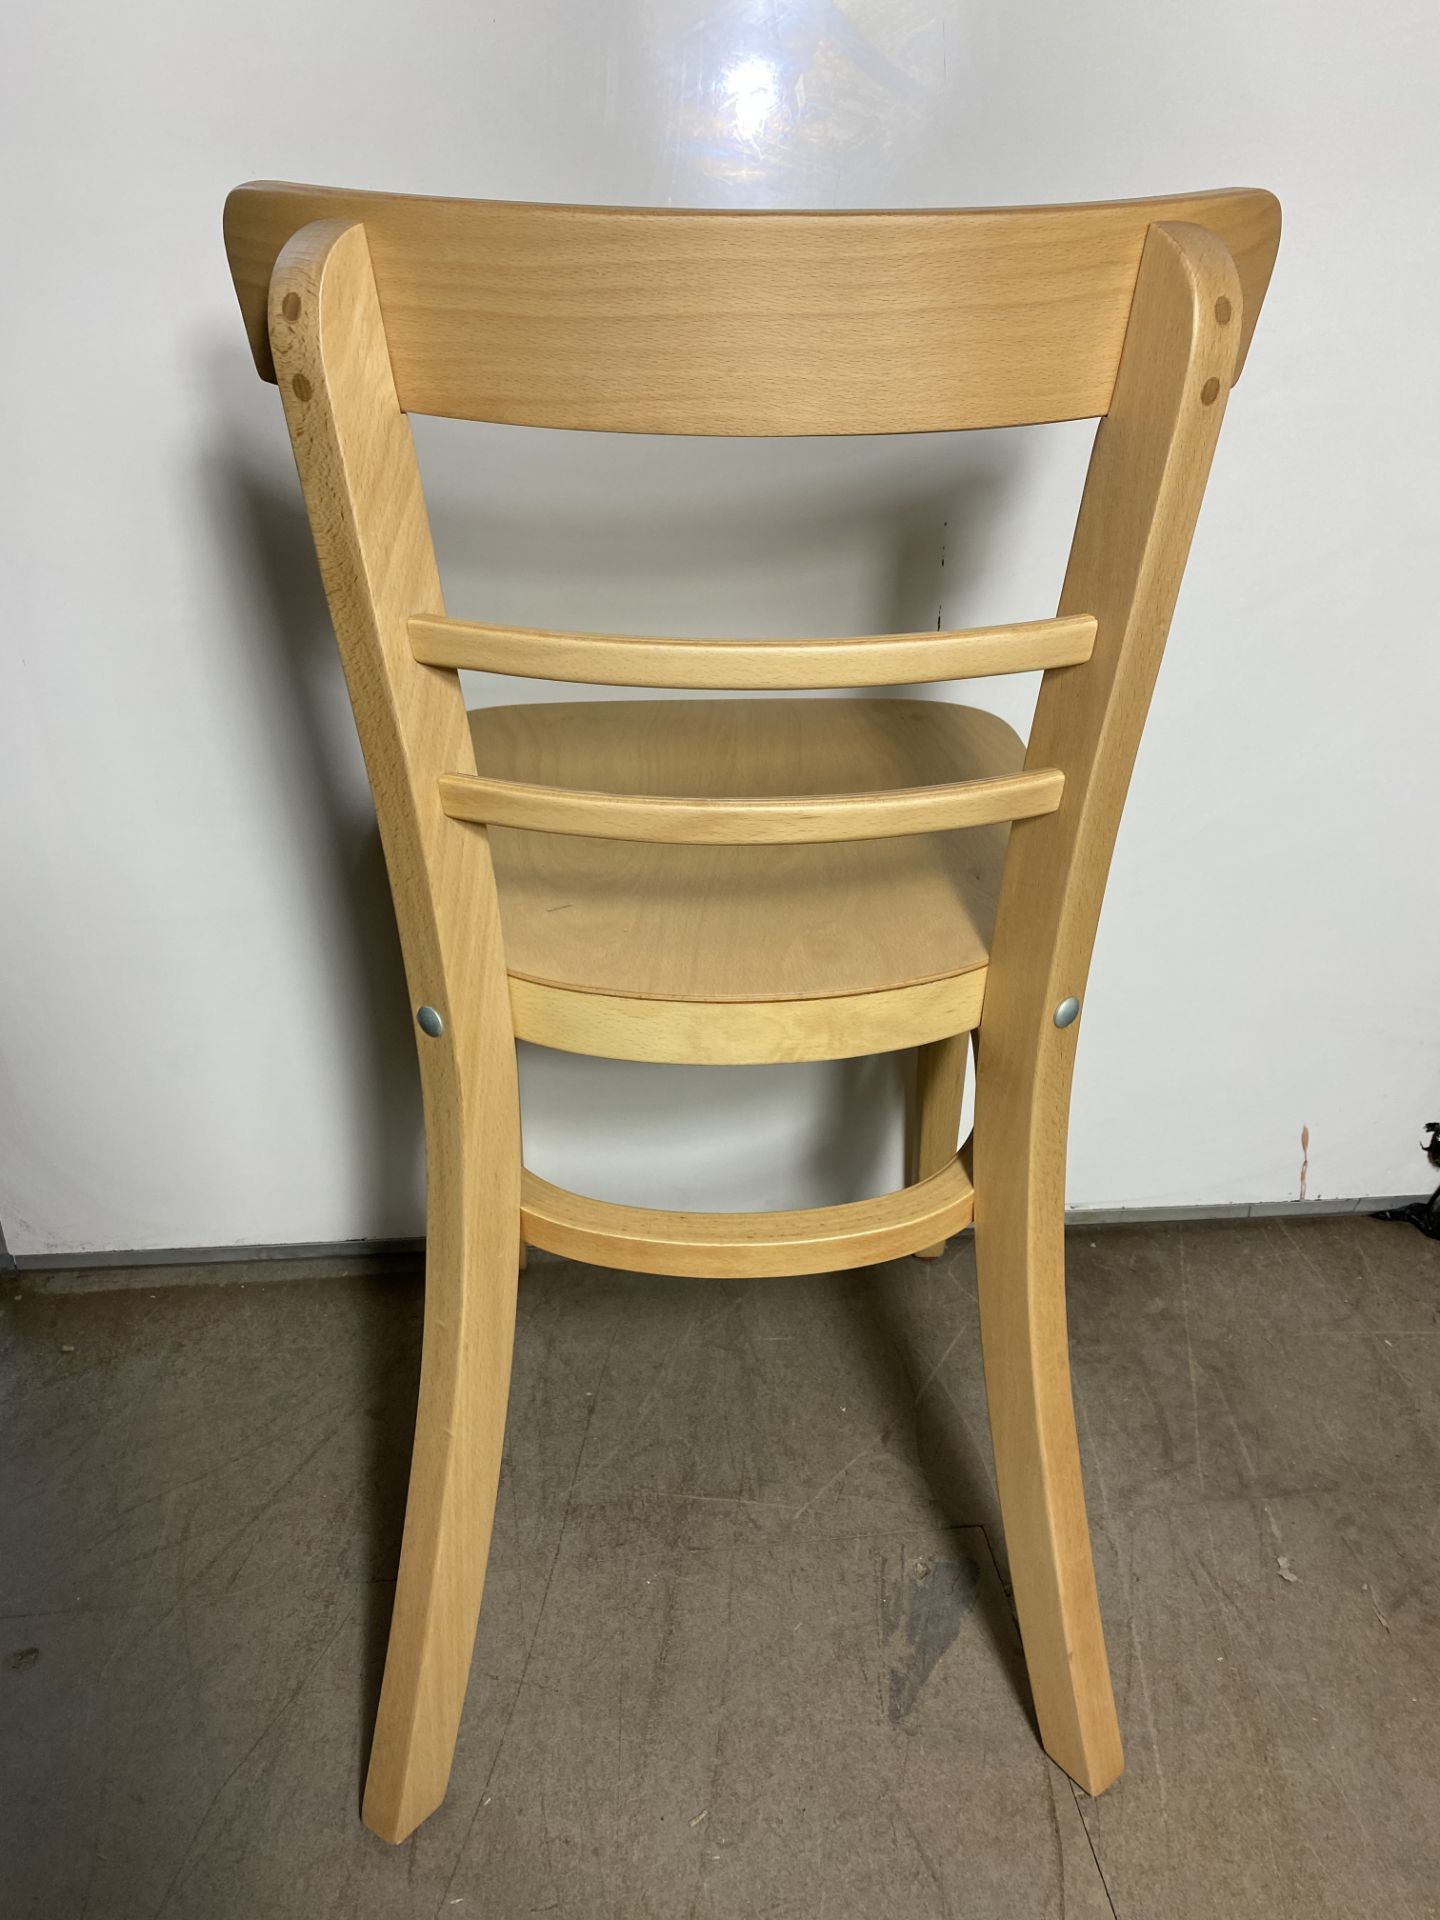 4 x Espresso Side Chairs | 3060628 - Image 4 of 6